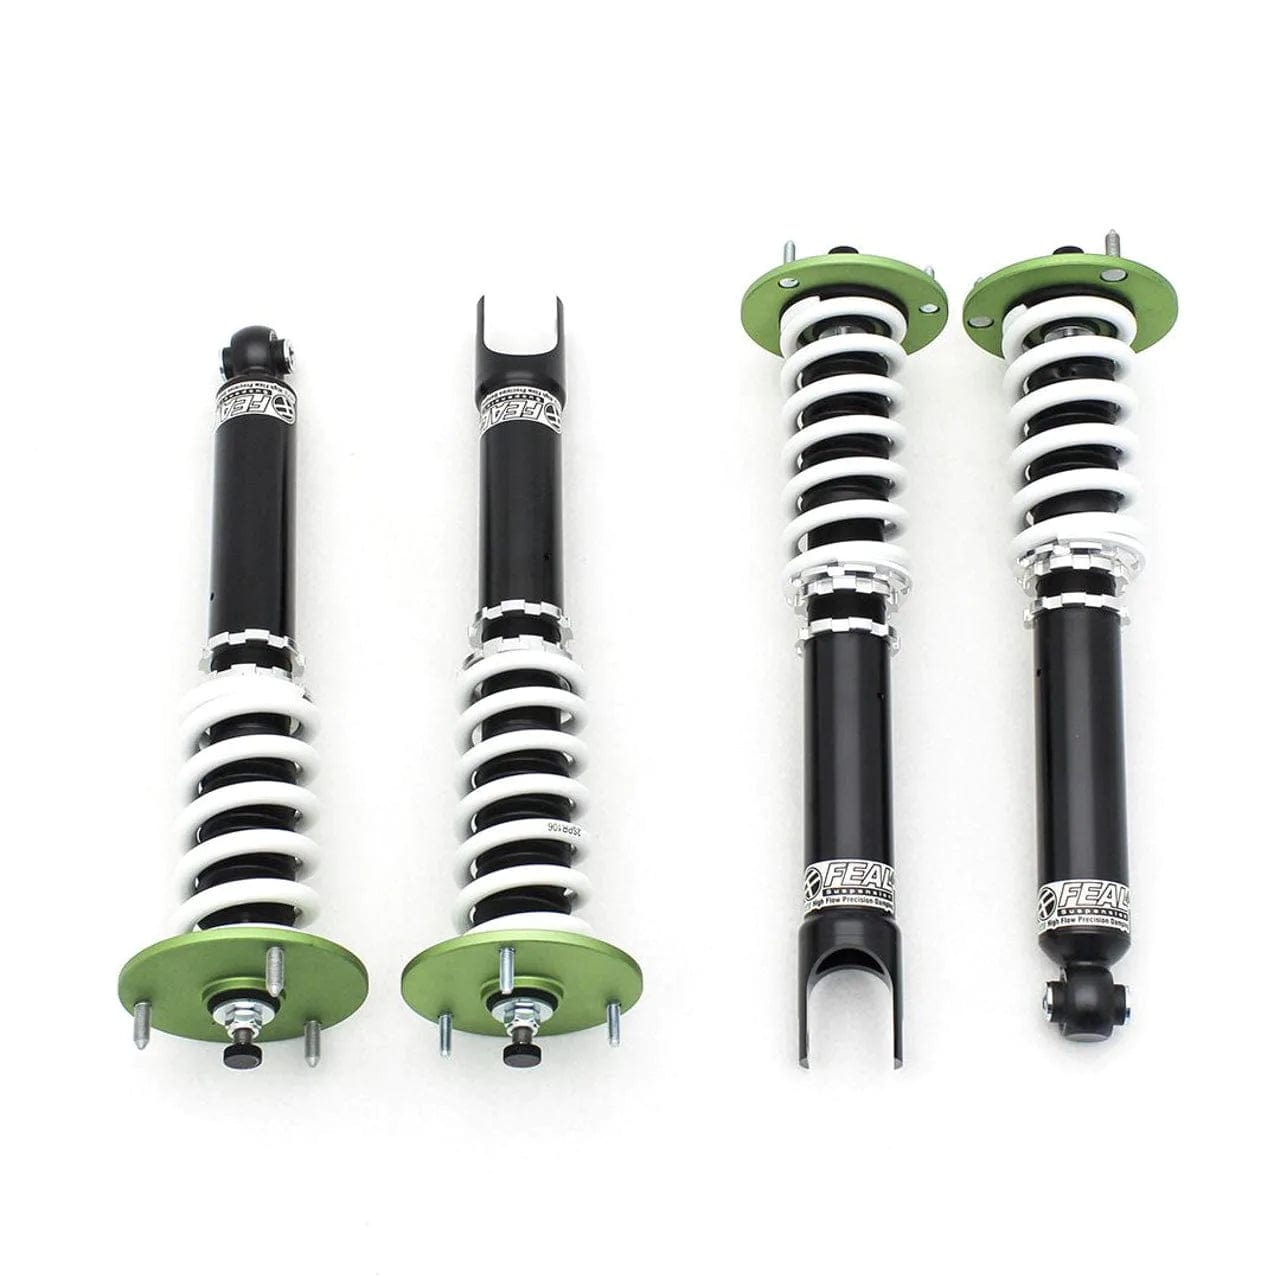 Feal 441 Heavy Front Coilovers - 1979-1993 Ford Mustang Foxbody 441FO-09H